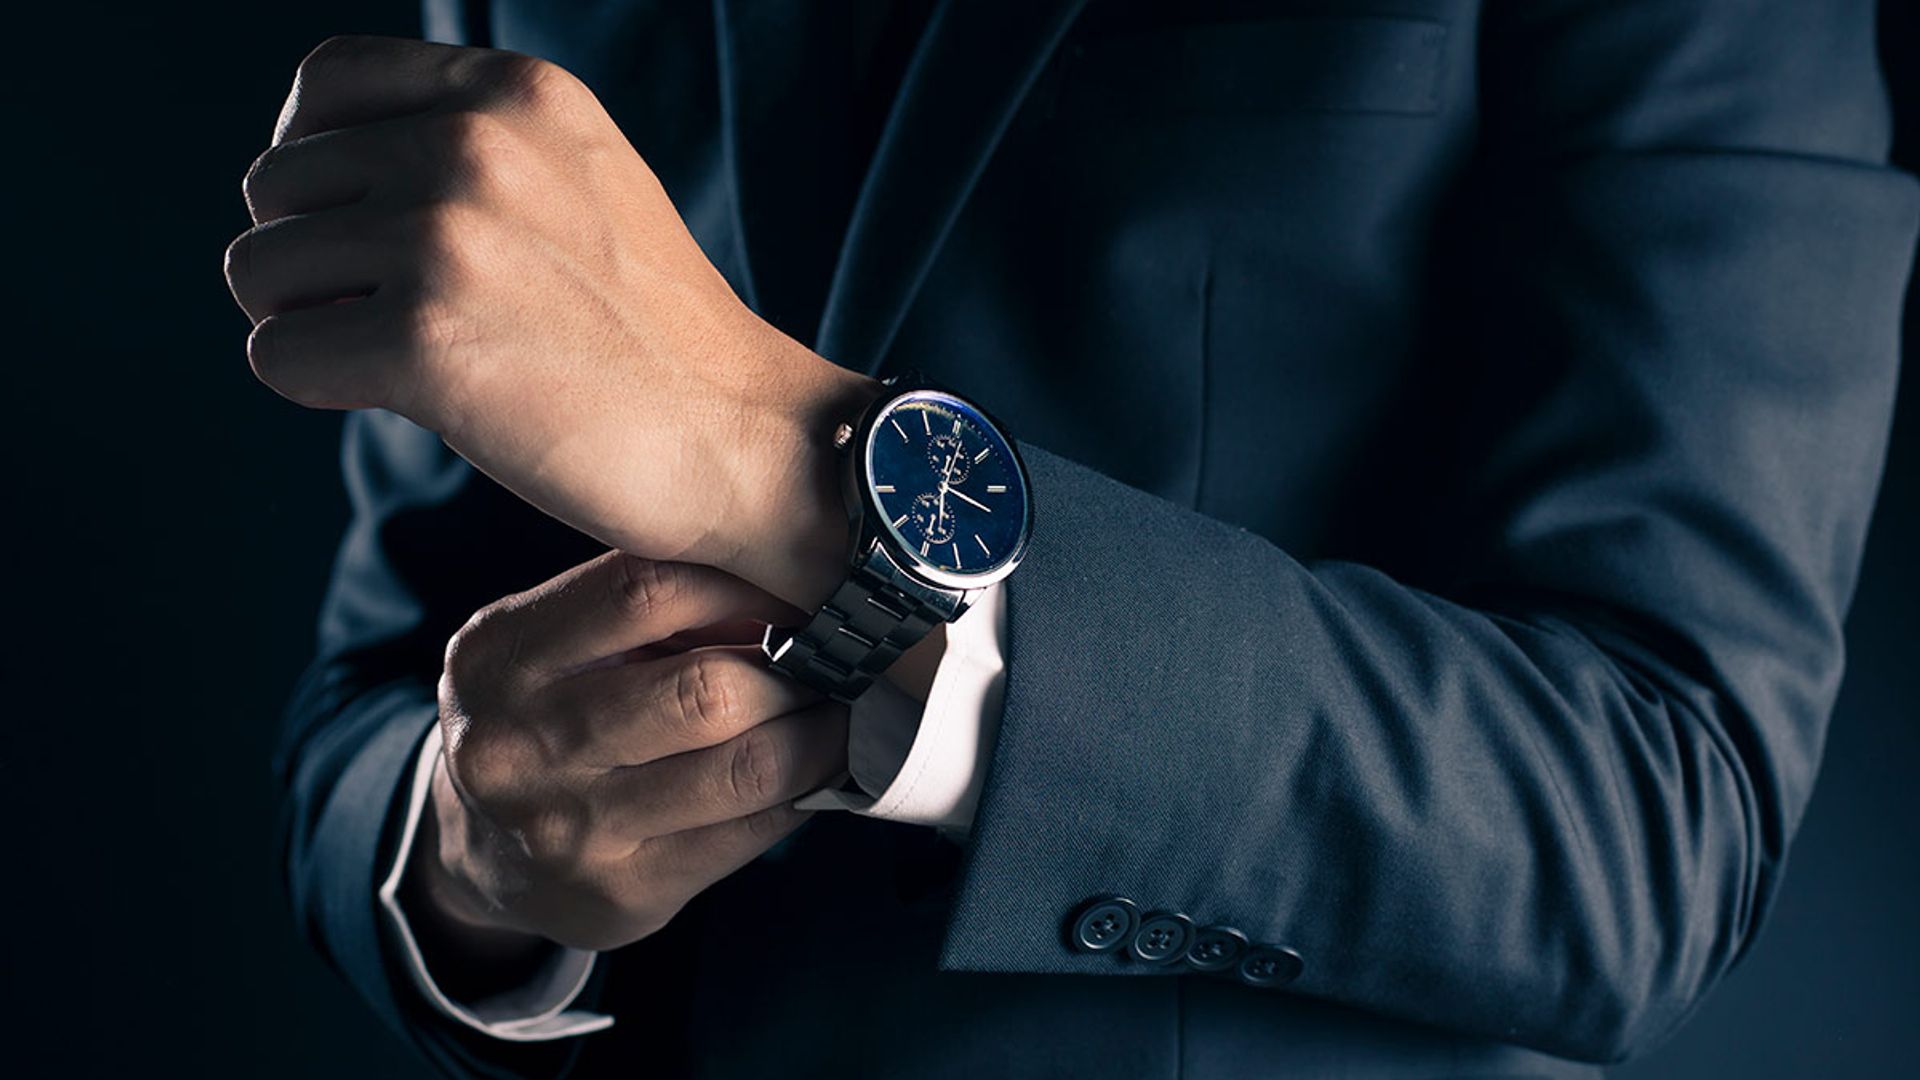 16 best watches for men: A guide to top watch brands ahead of Father's Day